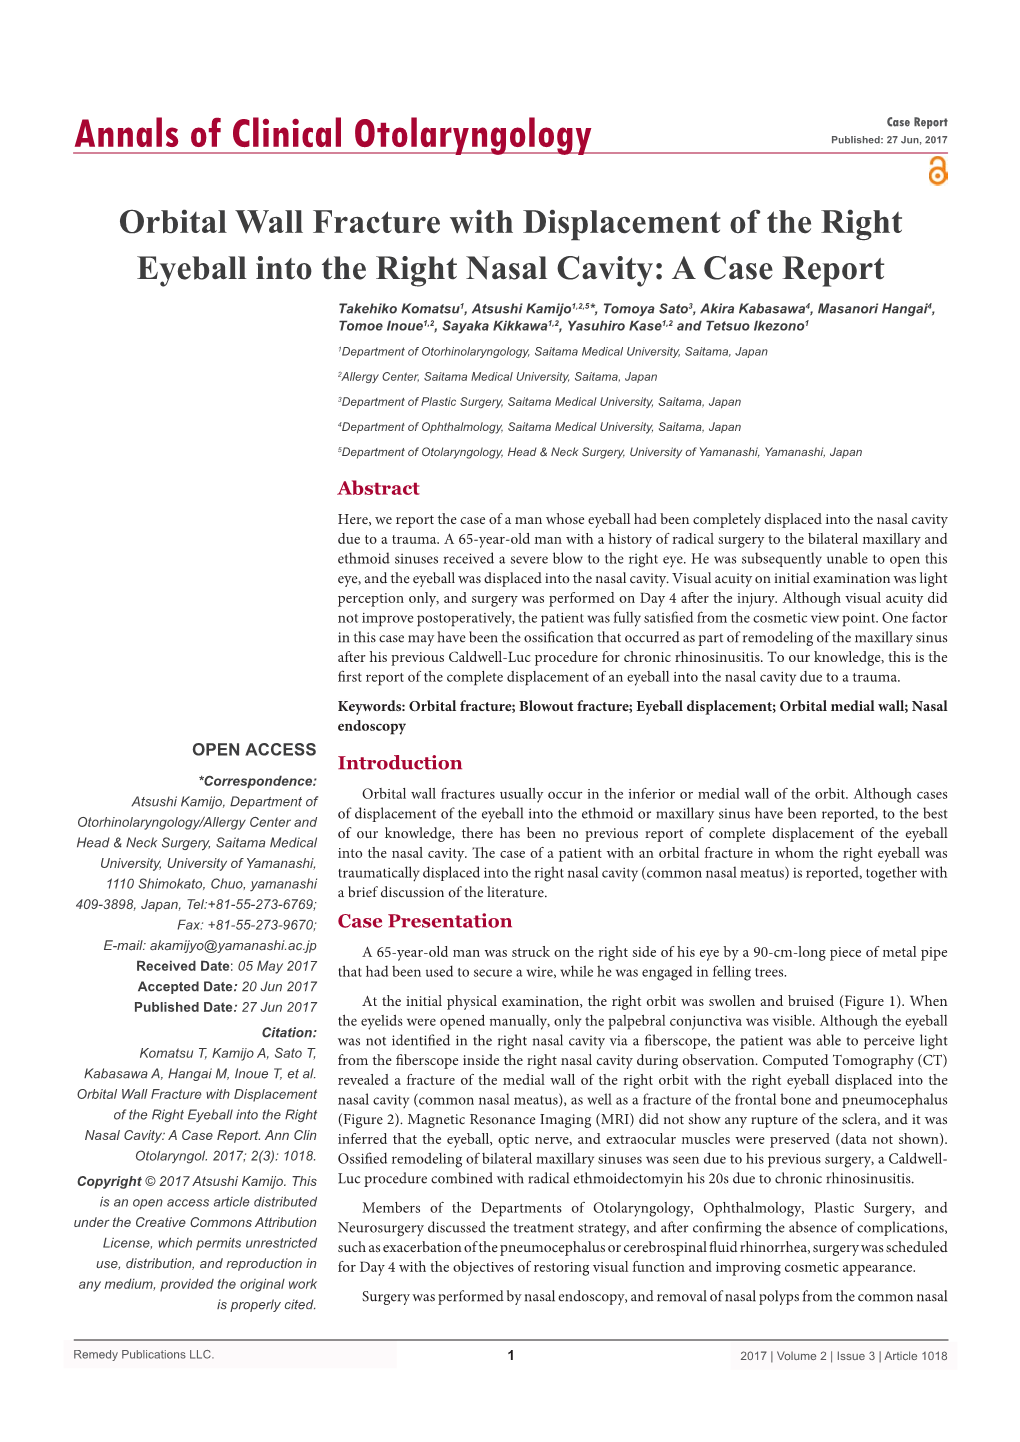 Orbital Wall Fracture with Displacement of the Right Eyeball Into the Right Nasal Cavity: a Case Report